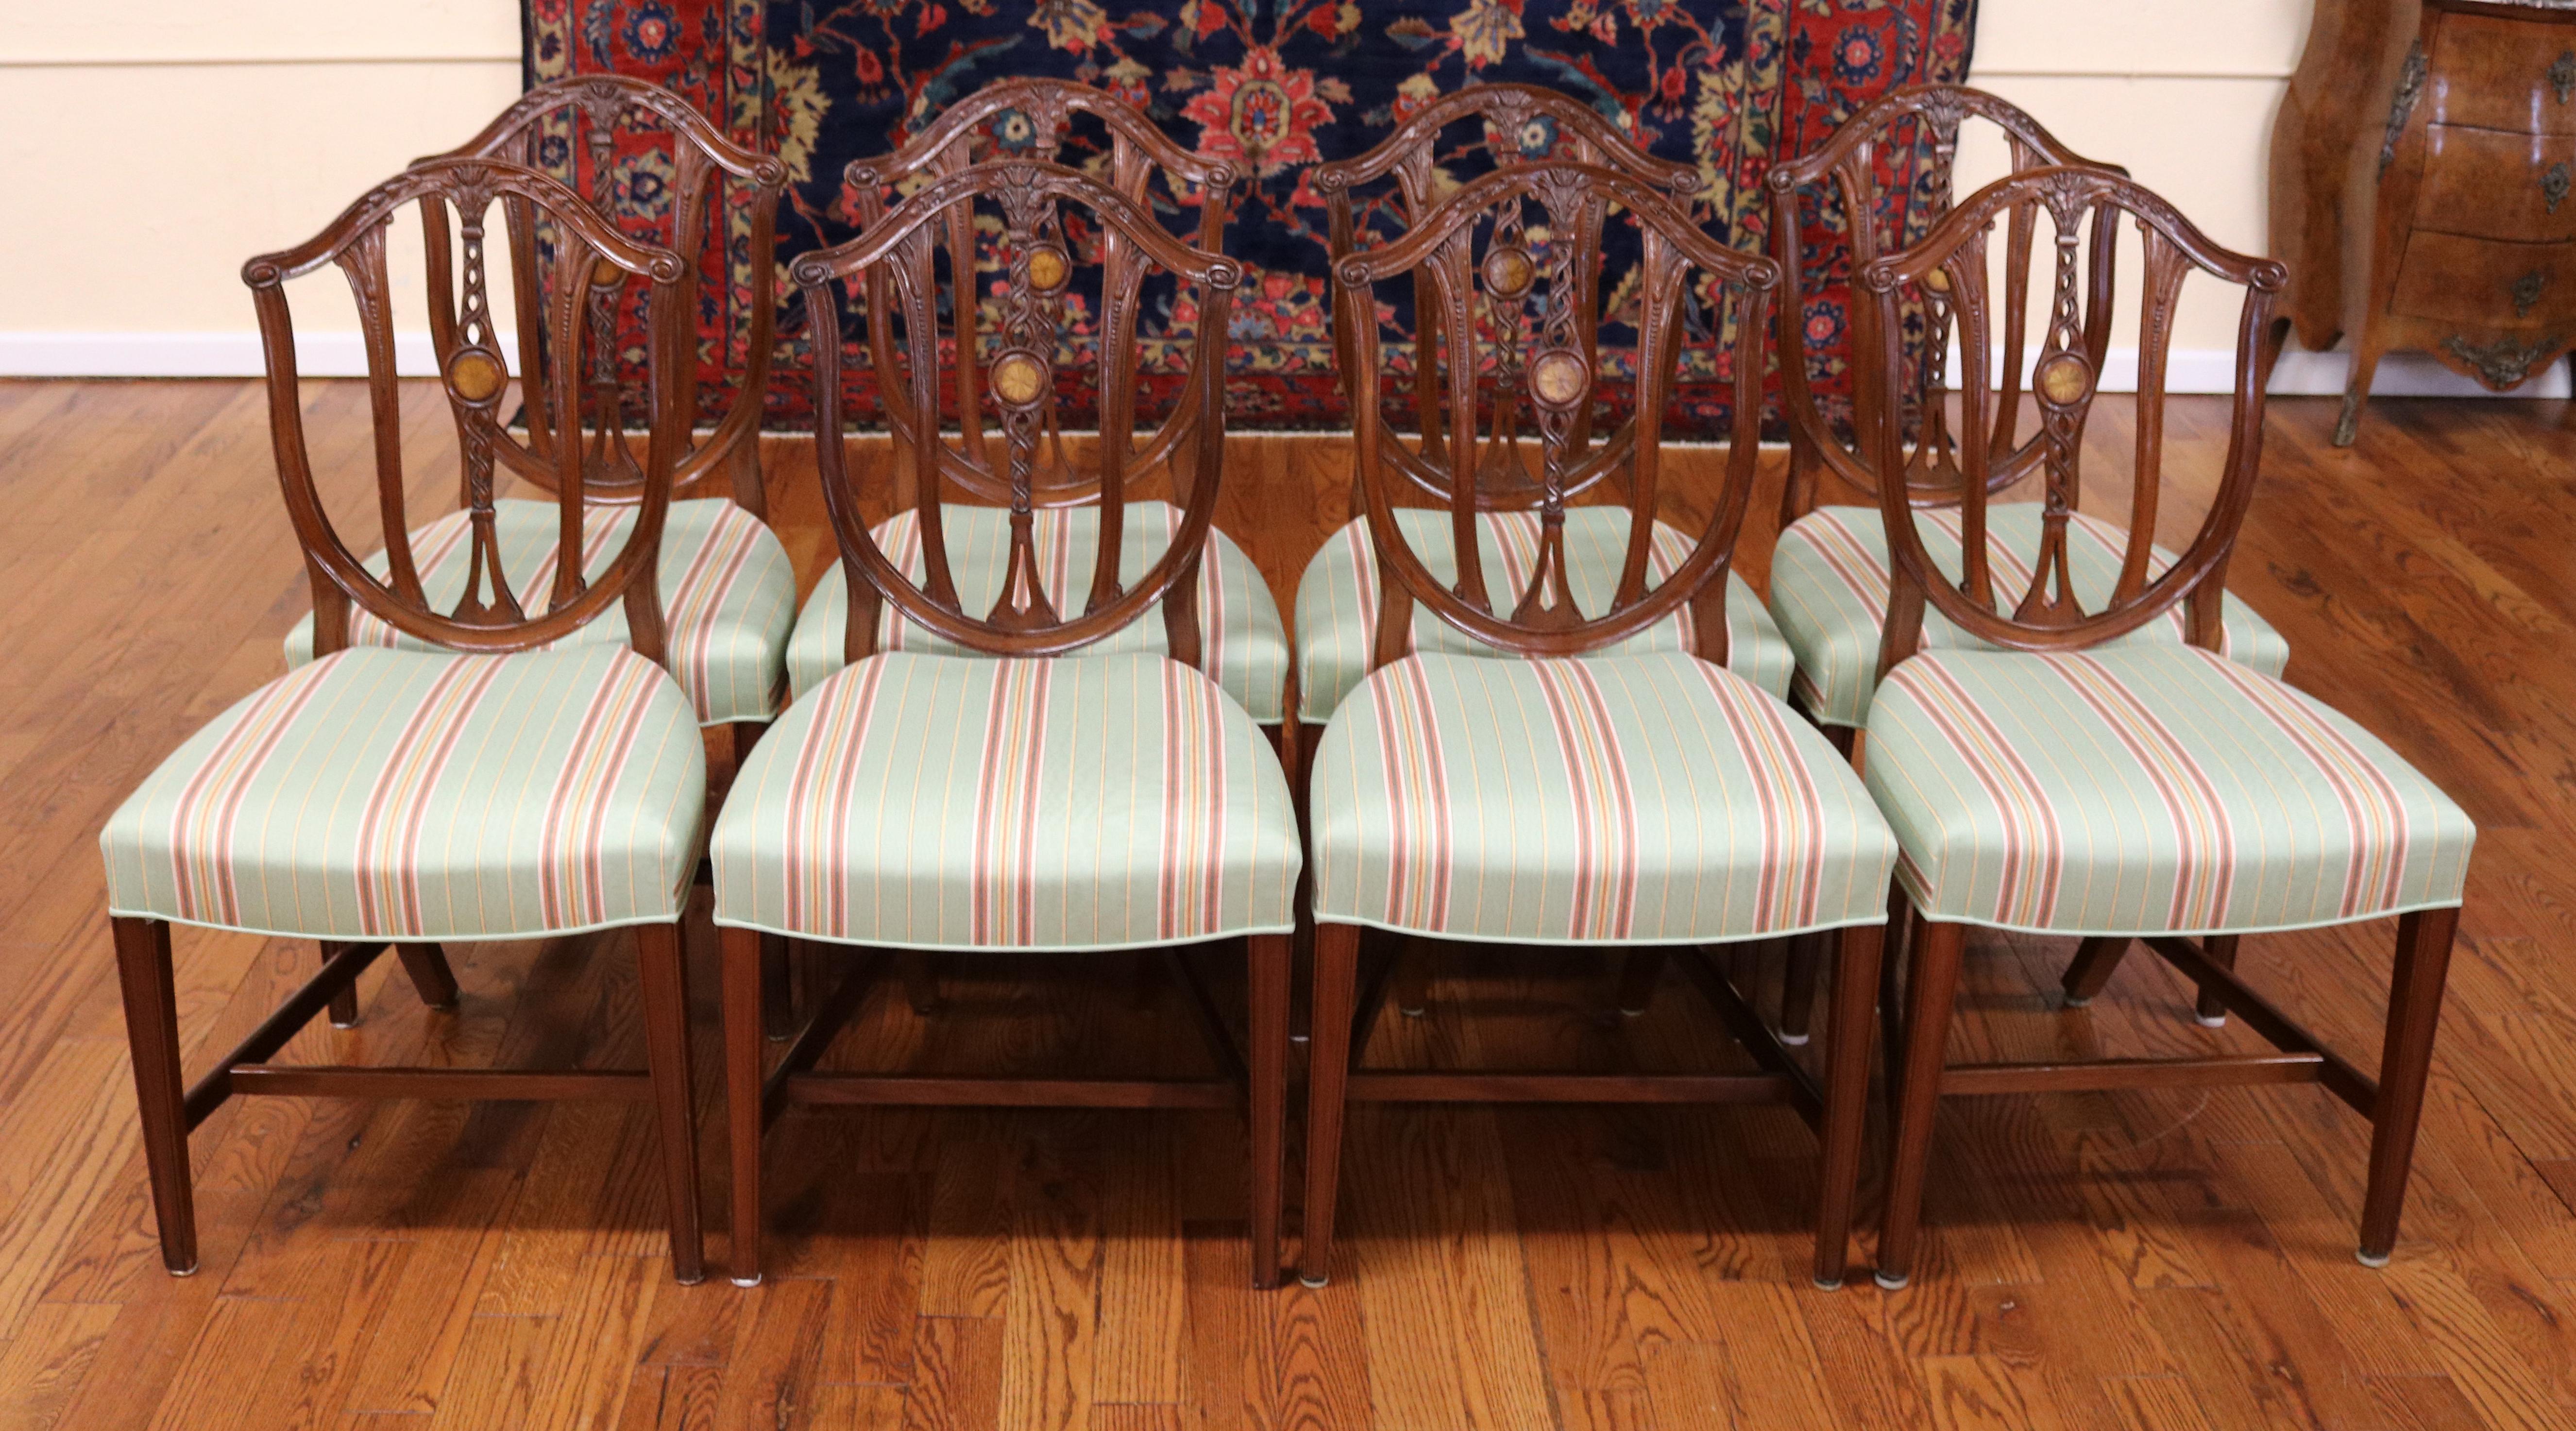 Set of 10 Early 20th Century Mahogany Baltimore Hepplewhite Dining Chairs In Good Condition For Sale In Long Branch, NJ